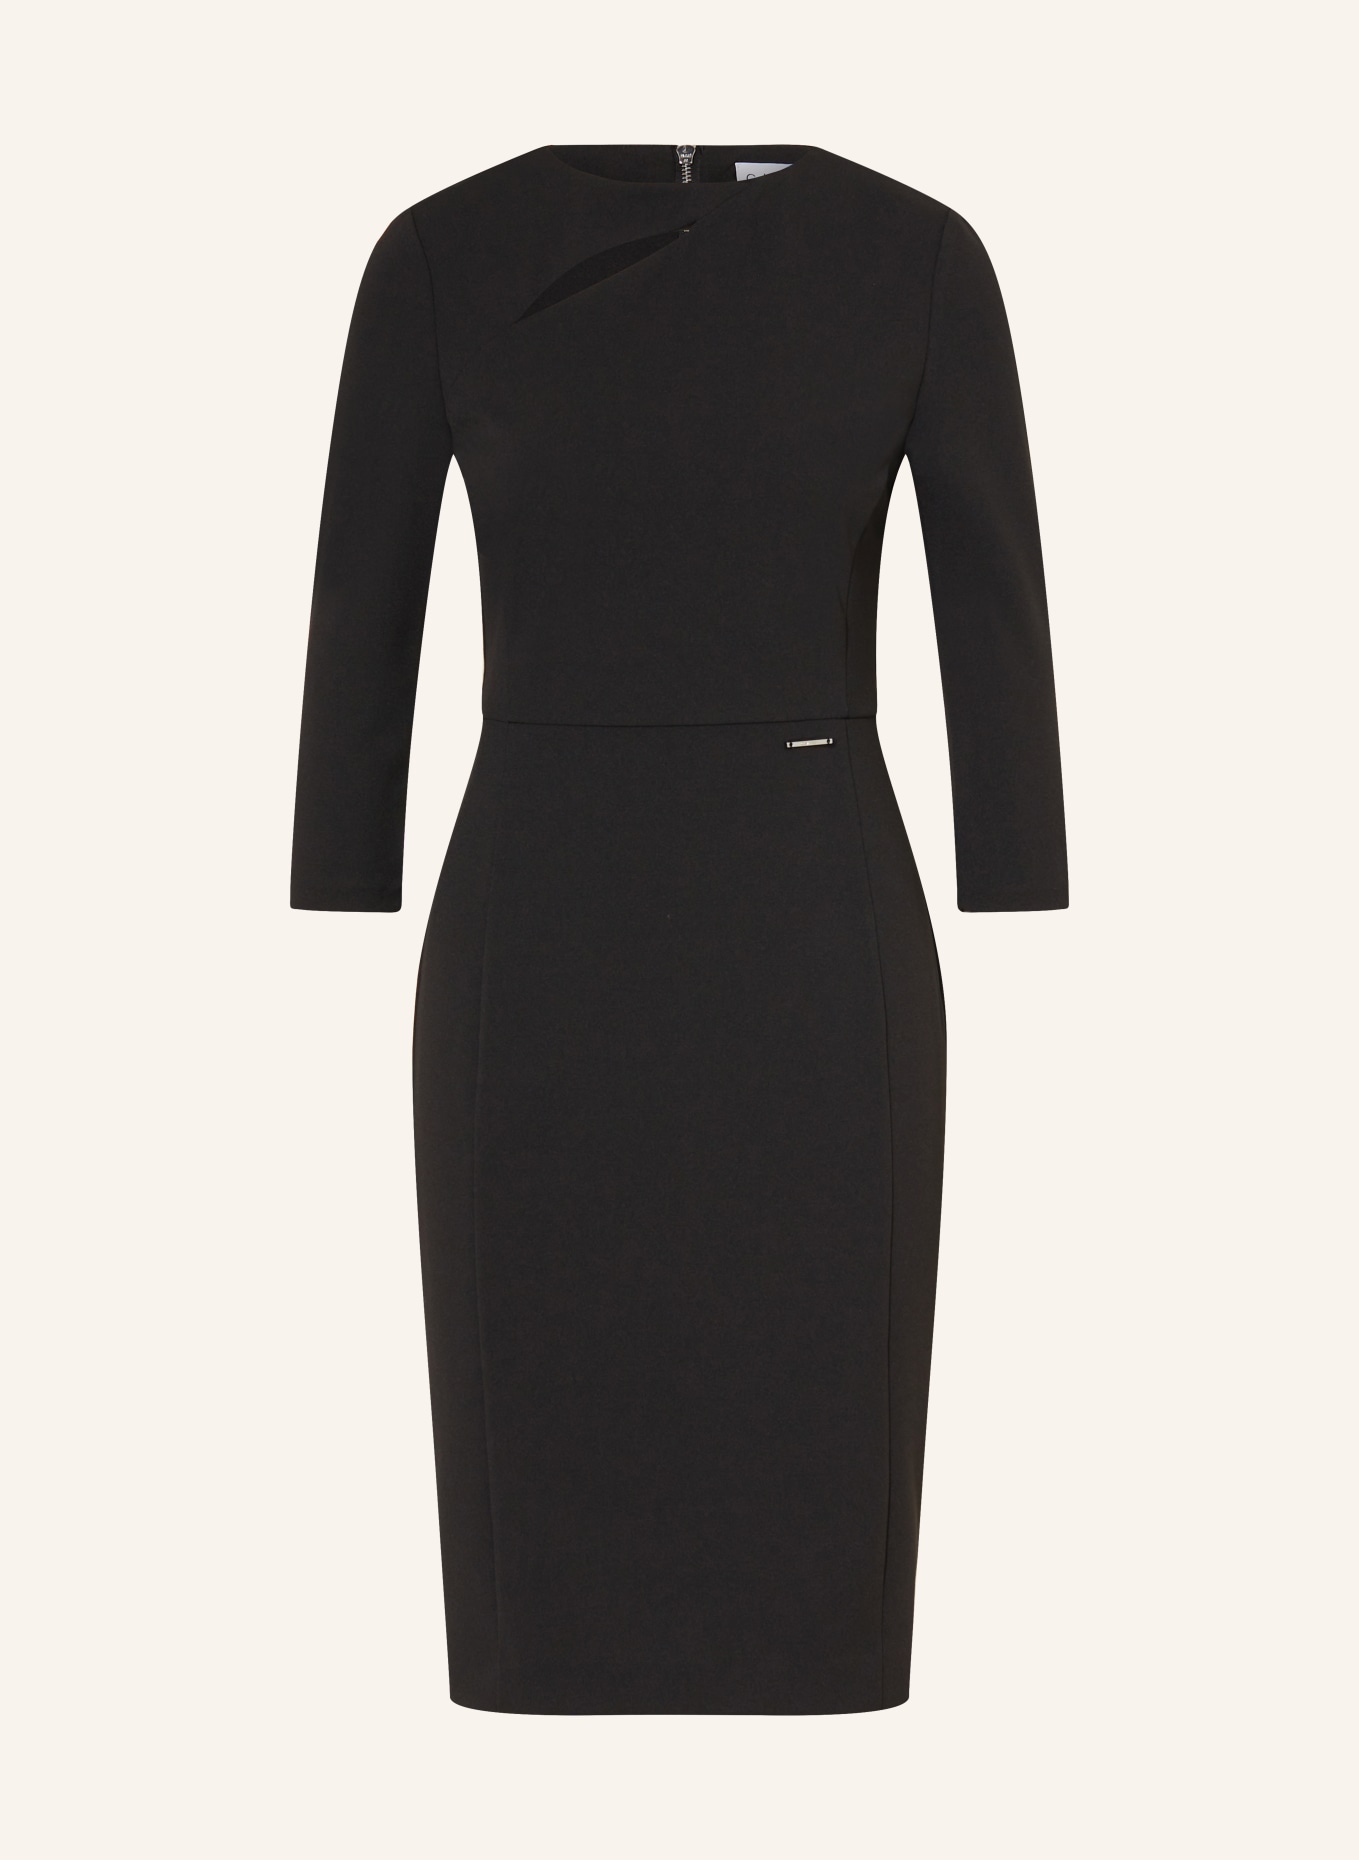 Calvin Klein Sheath dress with cut-out and 3/4 sleeves in black